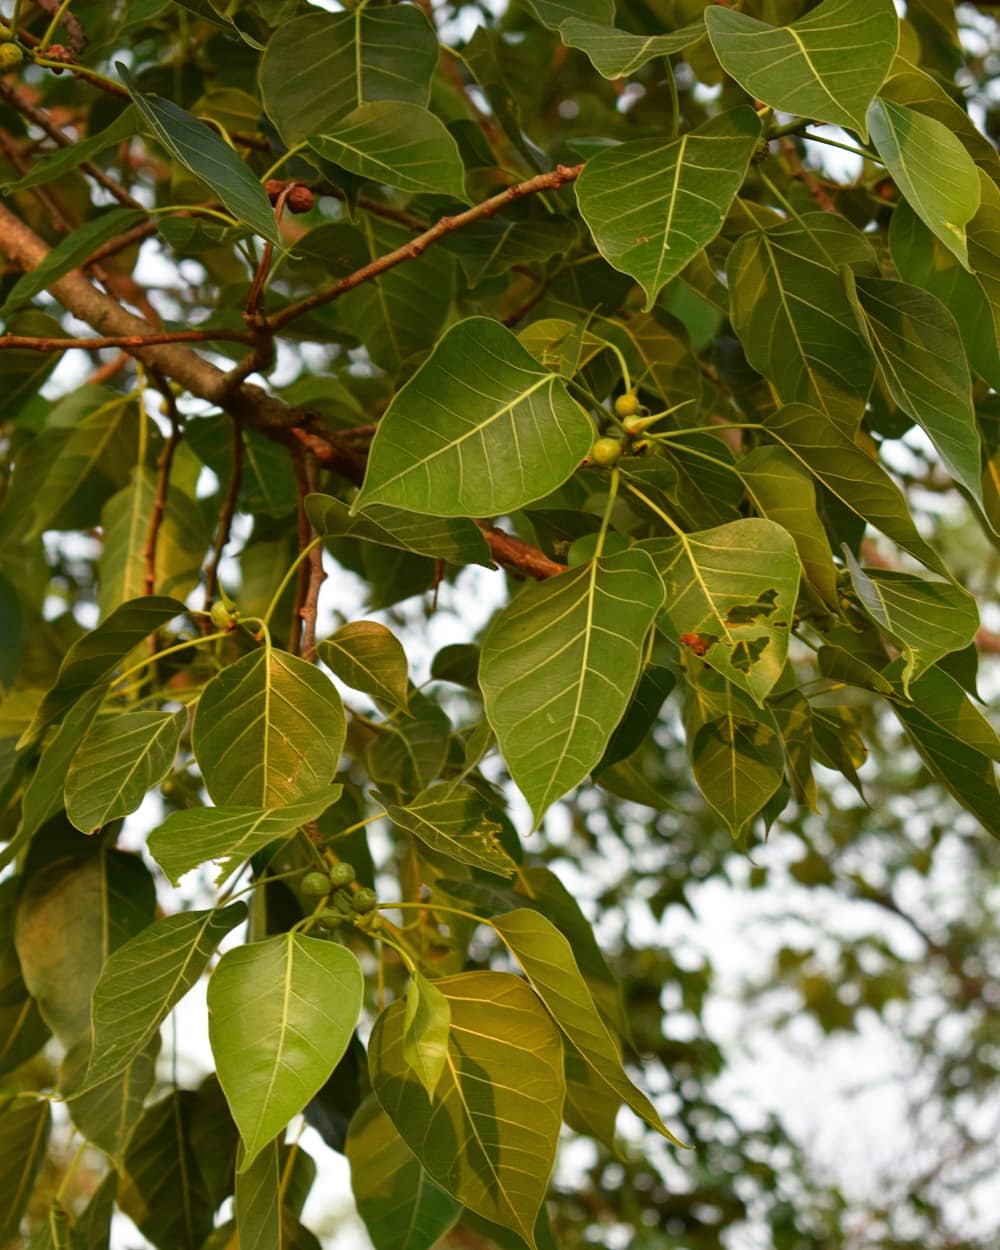 /wp-content/uploads/2020/10/Ficus%C2%A0rumphii%C2%A0leaves%20with%20fruit.jpg